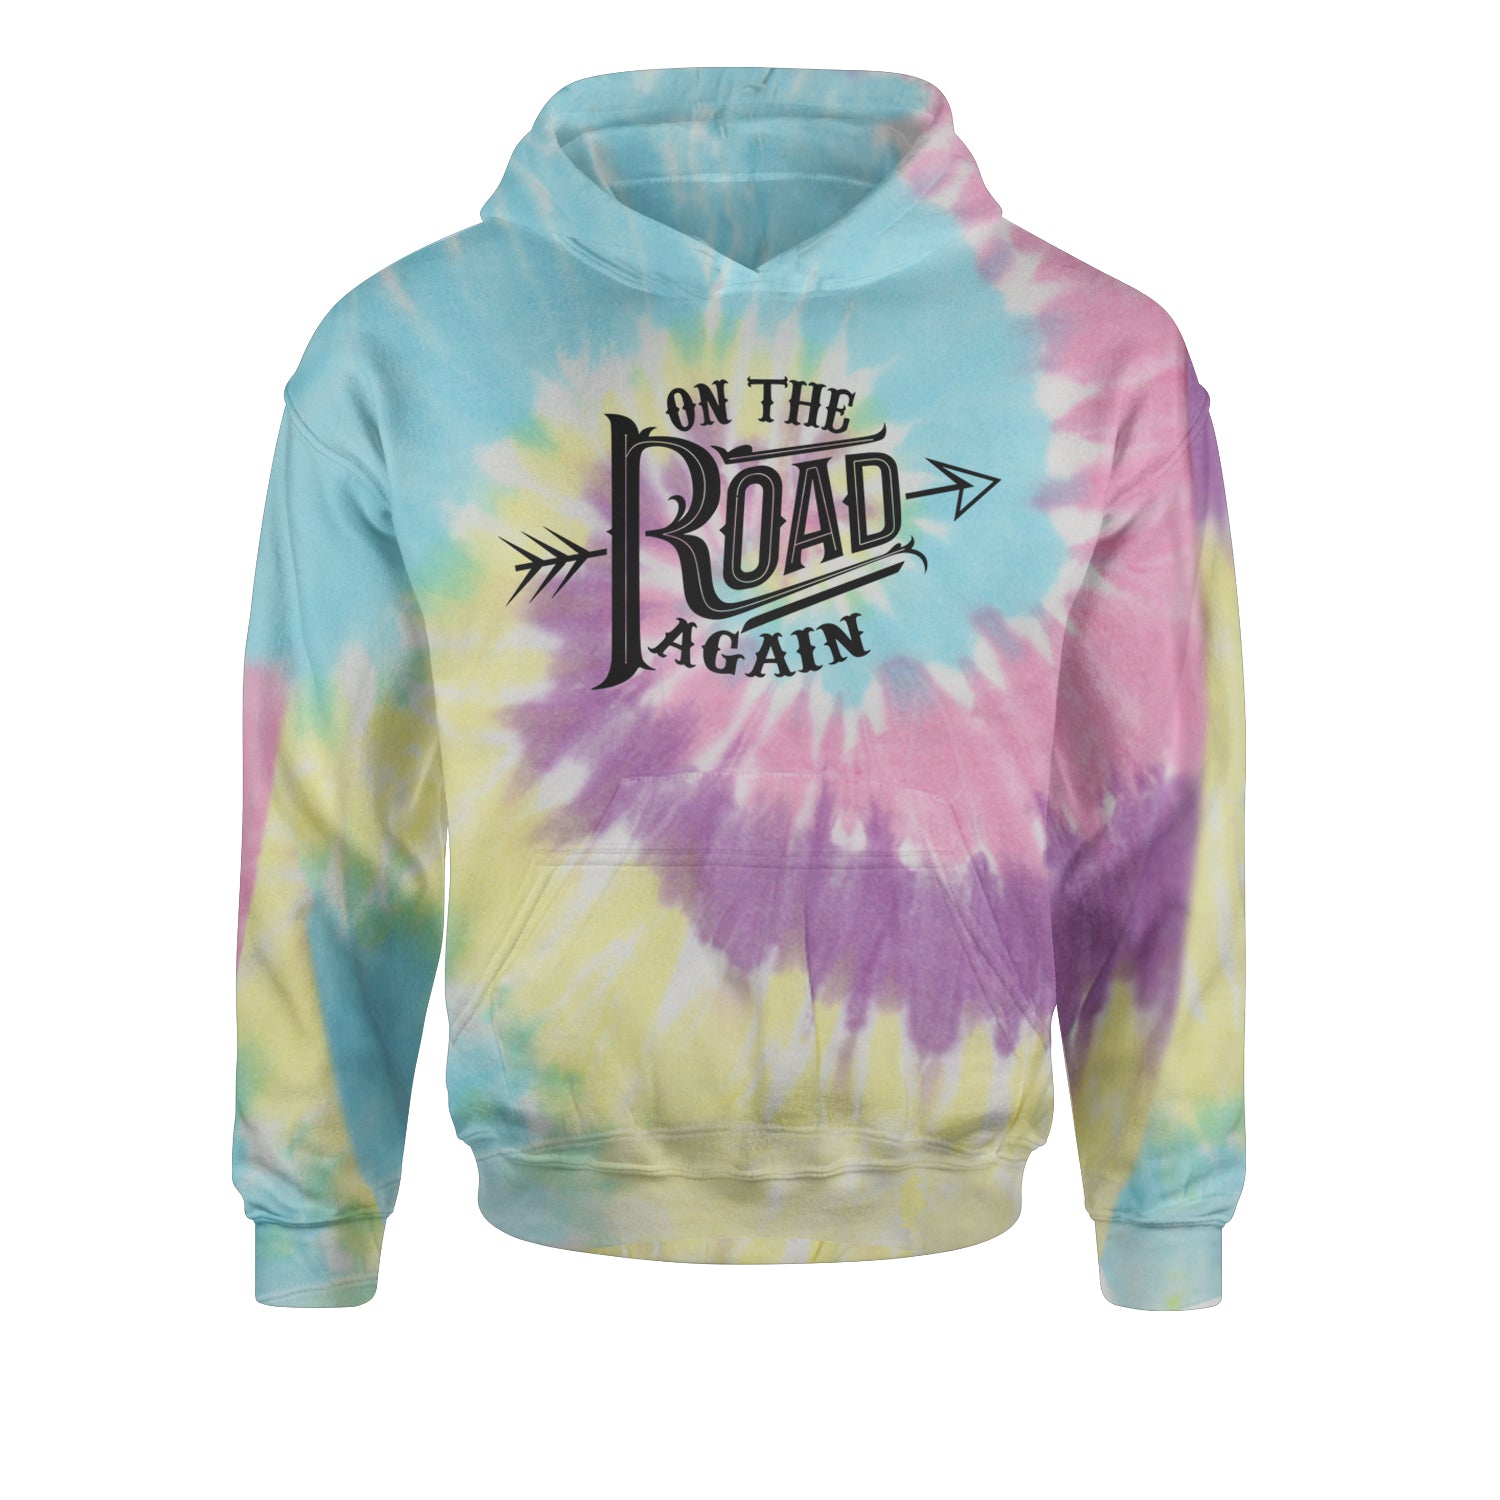 On The Road Again Hippy Country Music Youth-Sized Hoodie